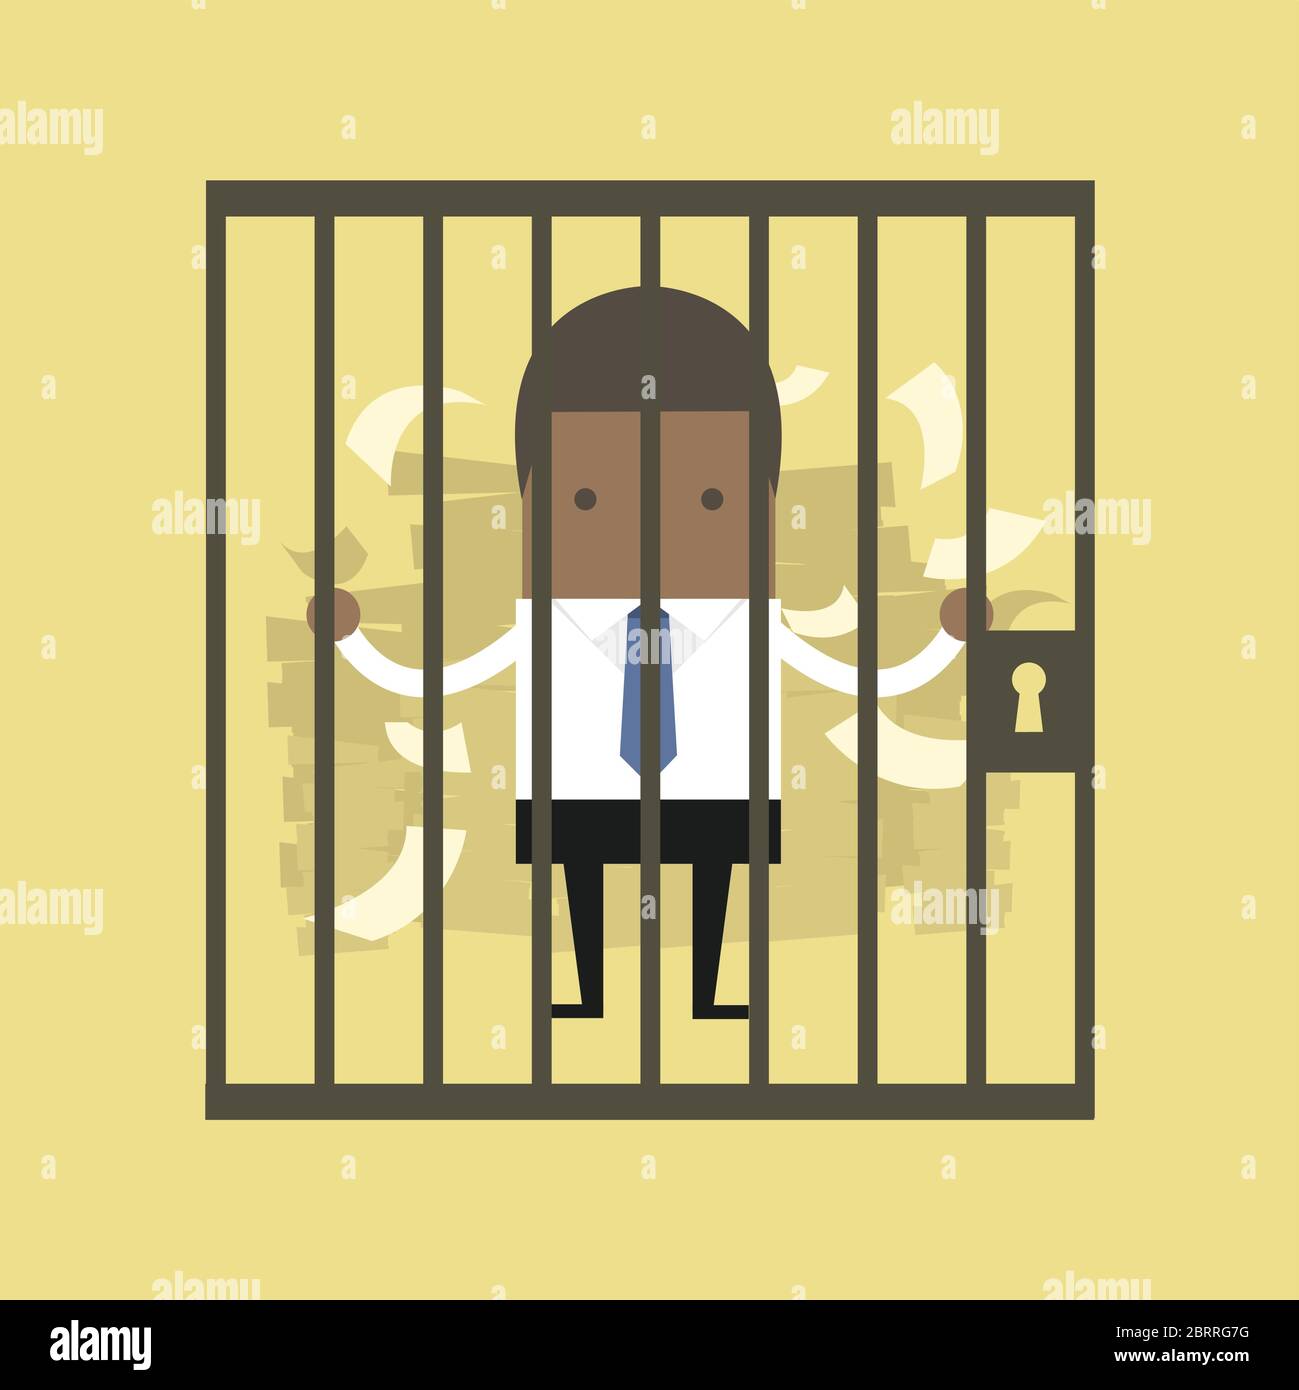 African businessman caught in a prison with unfinished work. Stock Vector